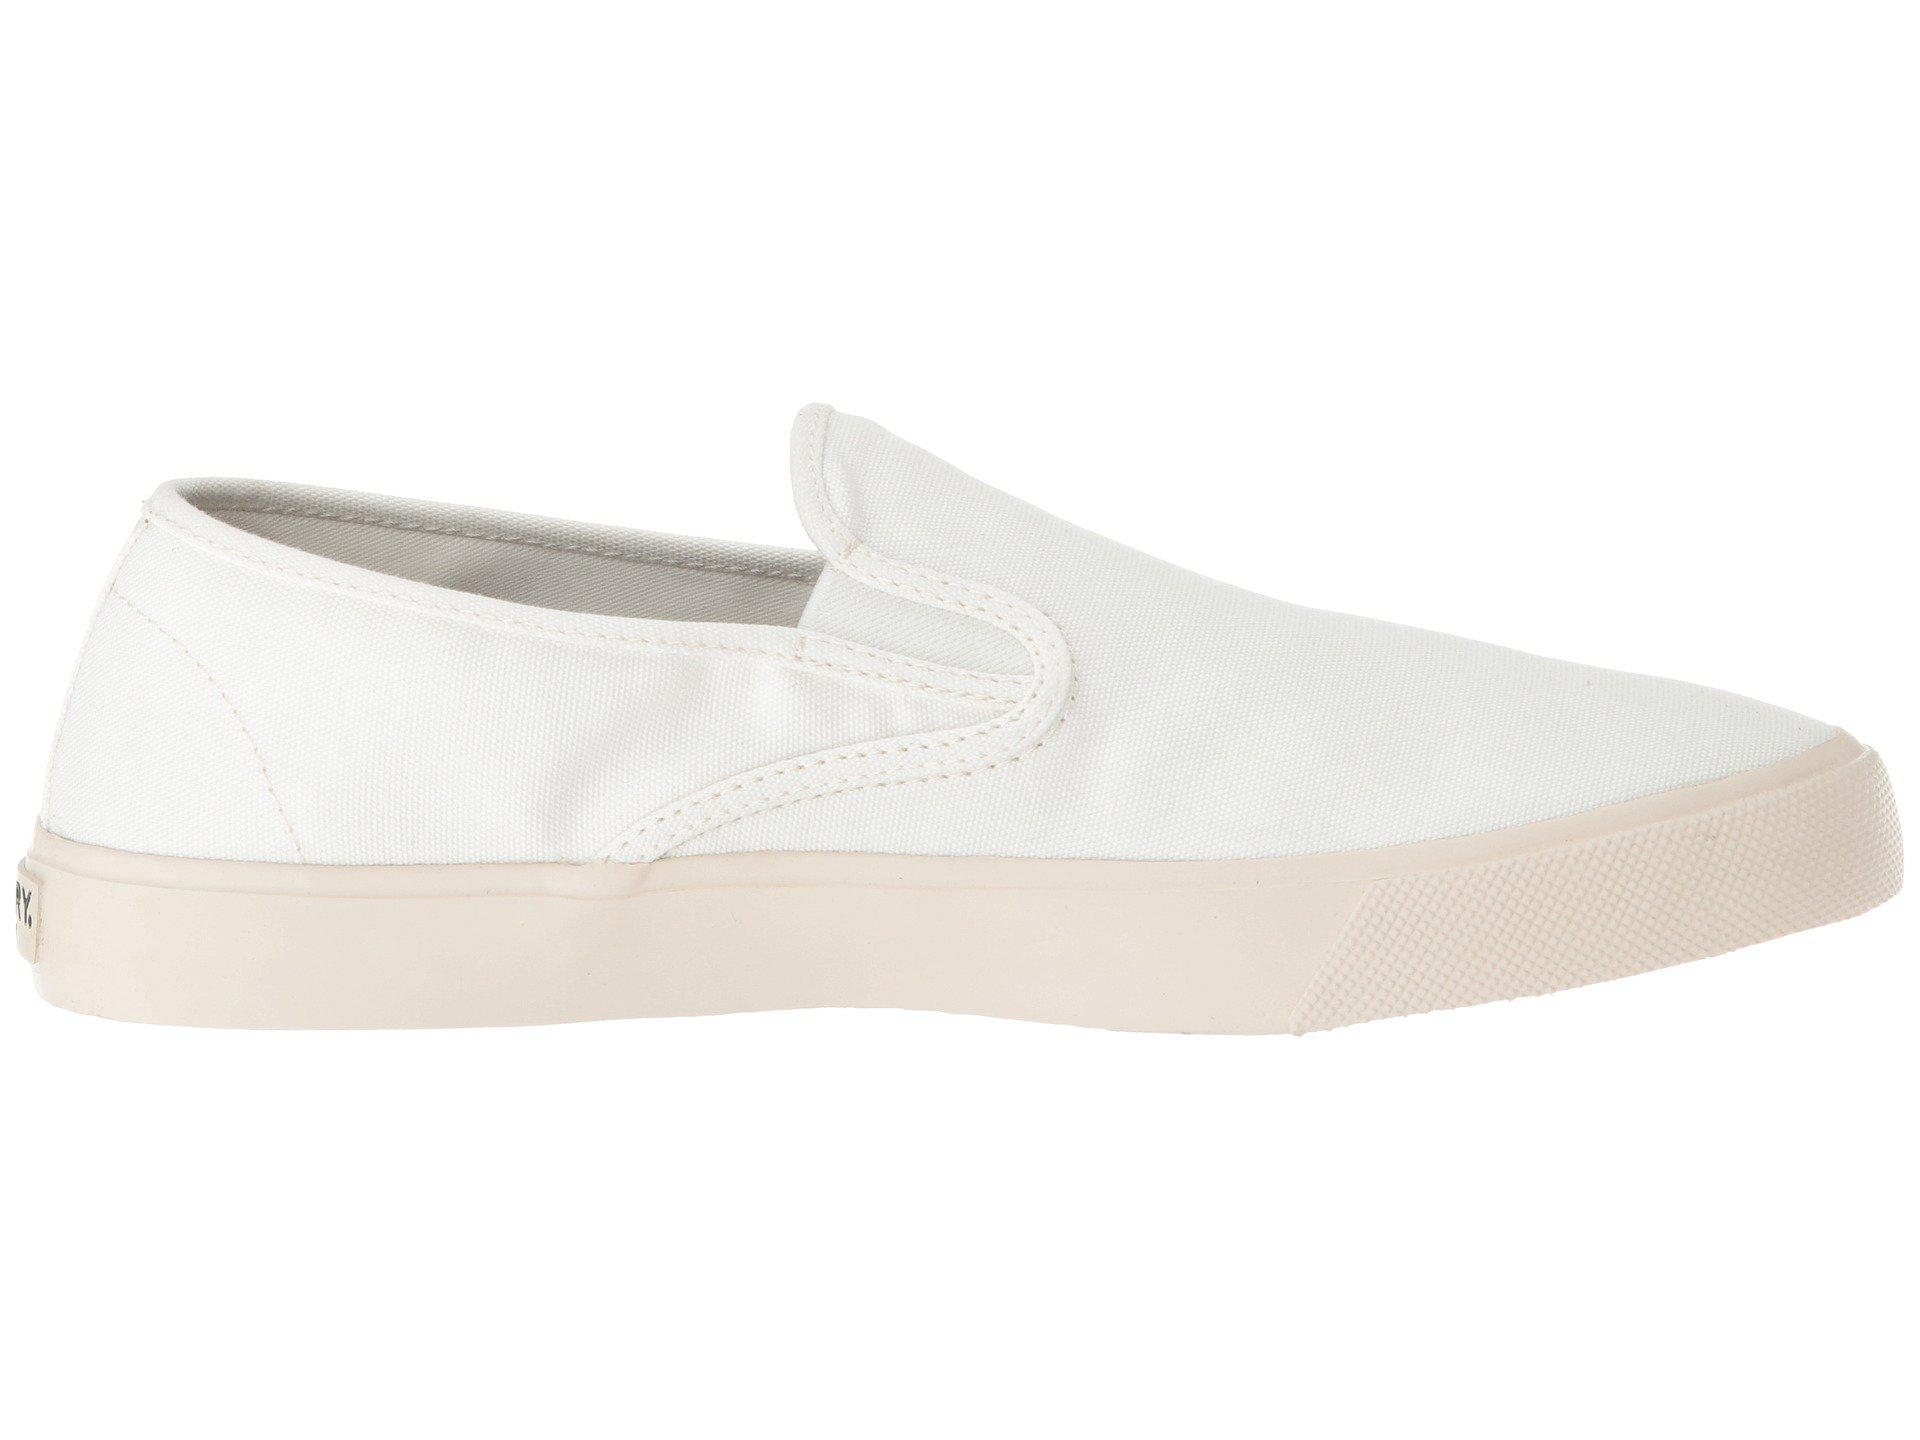 Sperry Top-Sider Canvas Captain's Slip 